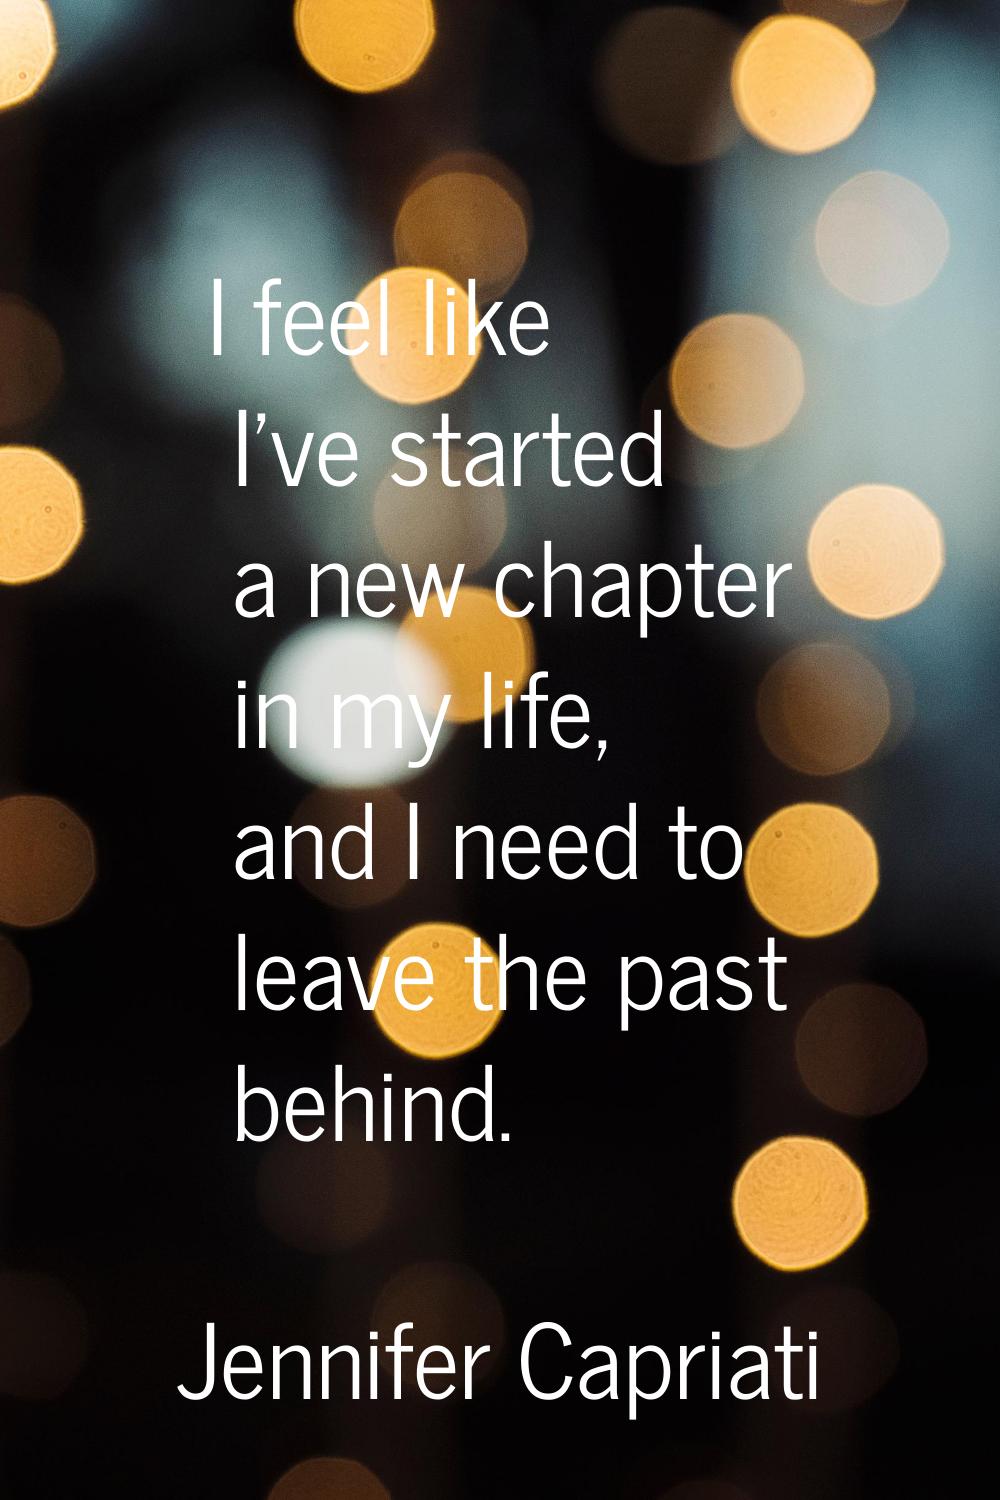 I feel like I've started a new chapter in my life, and I need to leave the past behind.